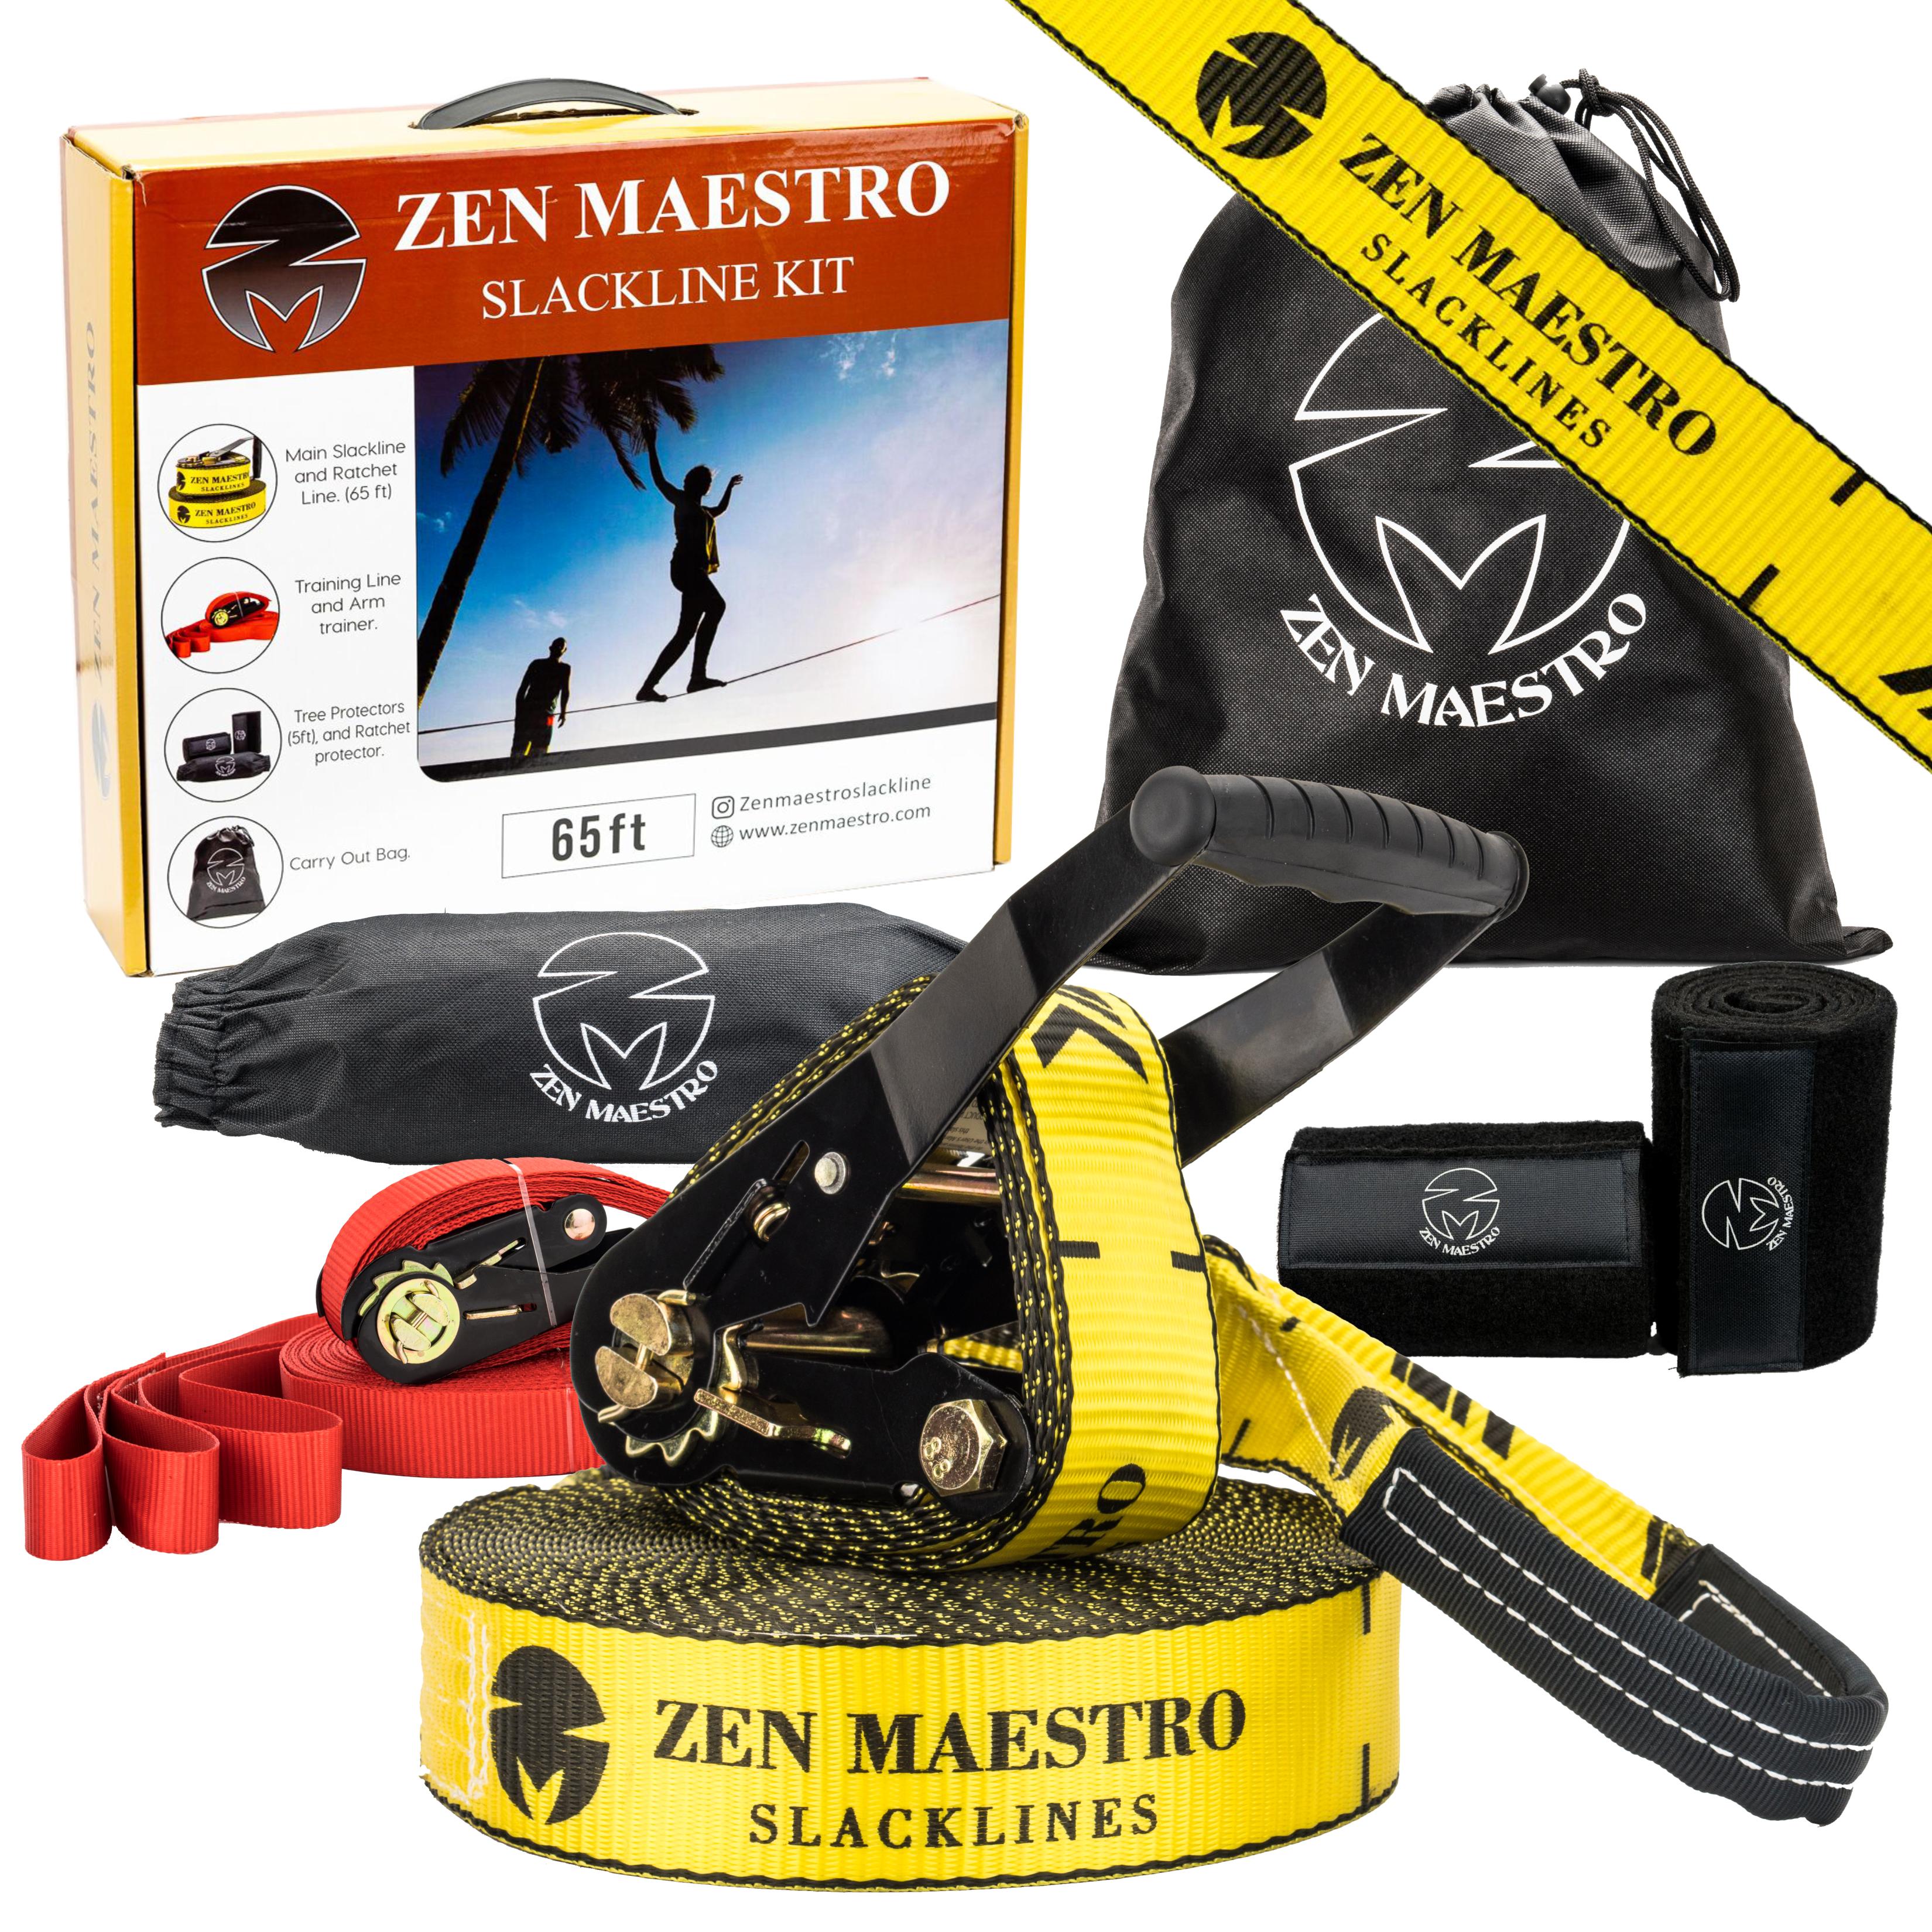 Gentle Booms Sports 250ft Slackline kit with Tree Protectors, Carry Bag,  Arm Trainer, Backyard Outdoor Slackline kit, Ninja Warrior Slackline